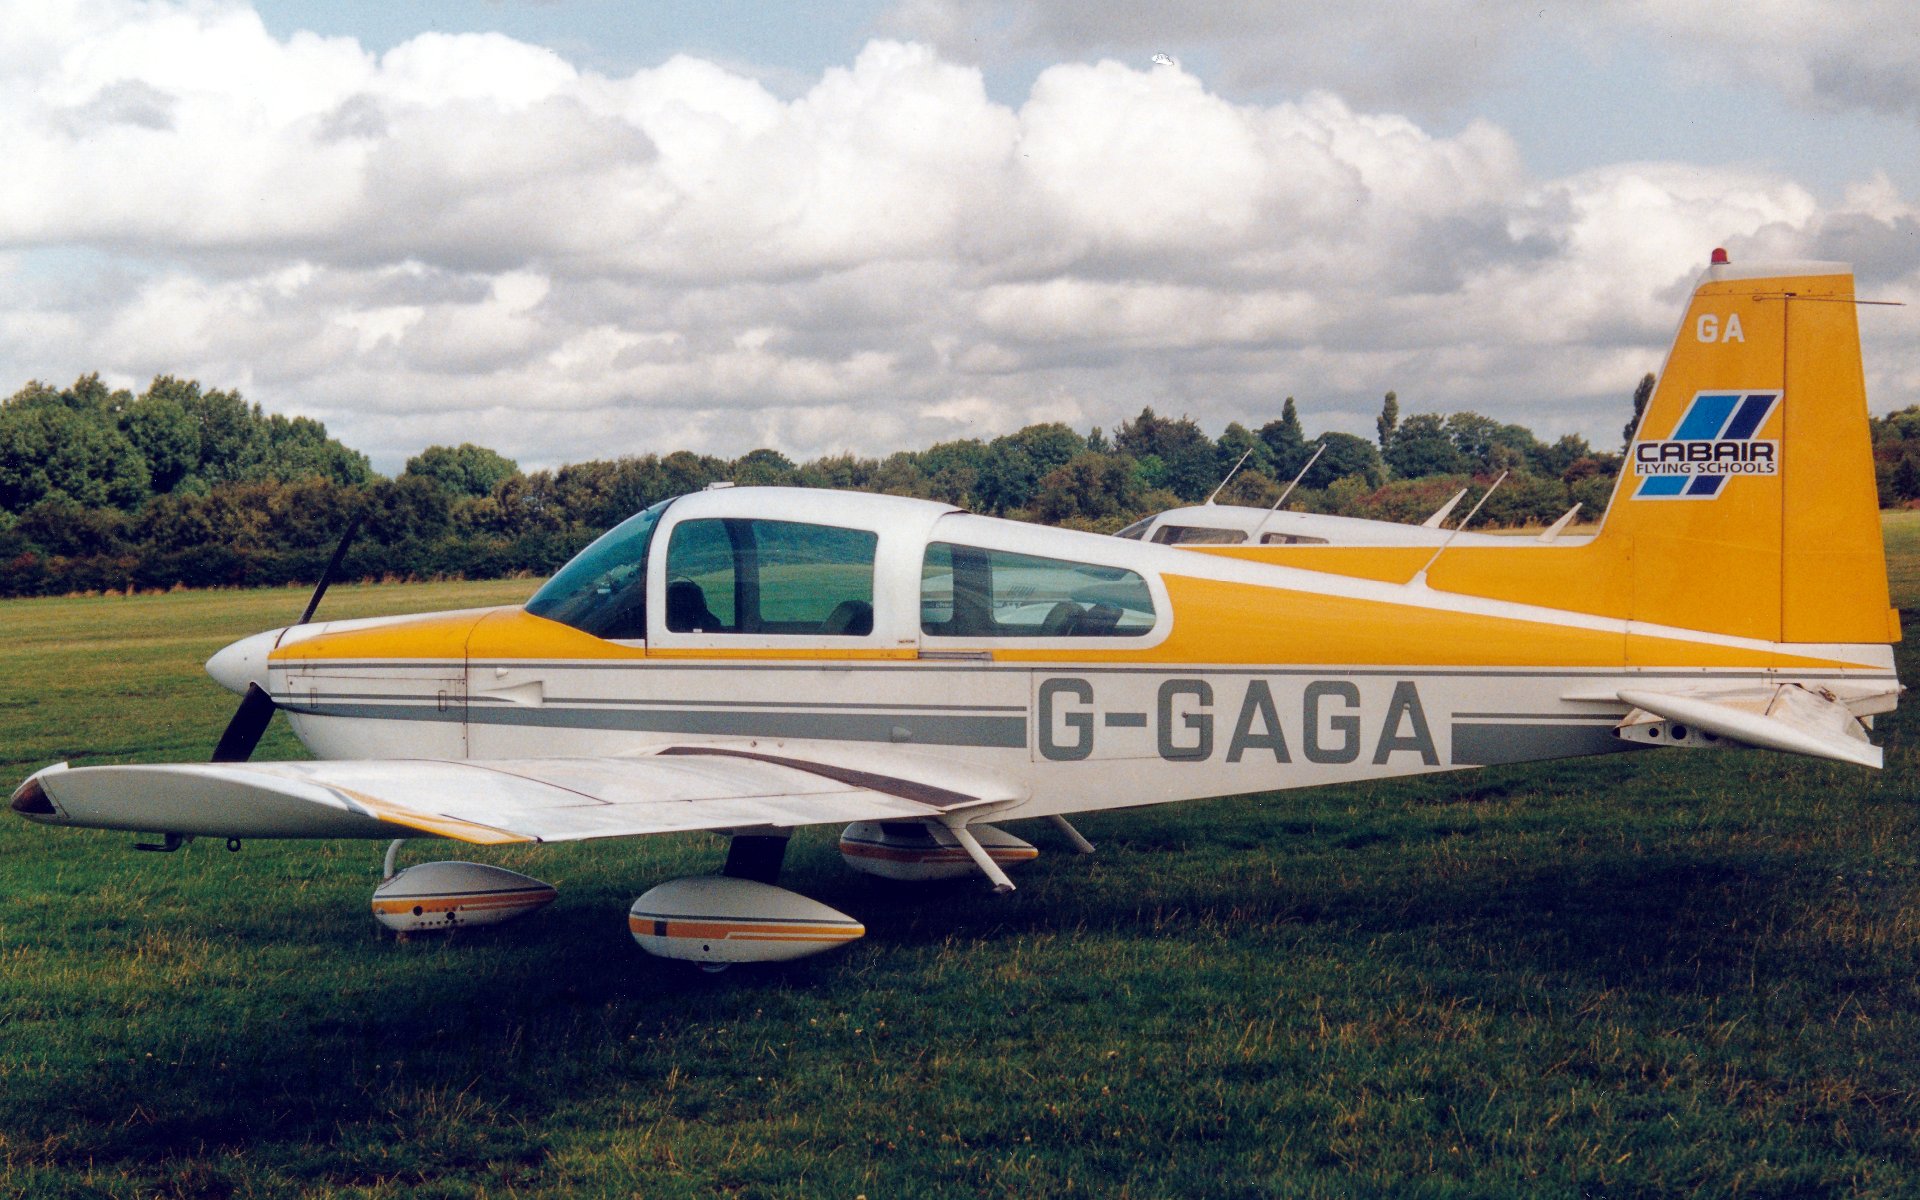 Side view of a single engined light aircraft parked on grass, facing to the left. The plane has a white lower half, with a yellow top, , and a grey stripe in the middle. The registration "G-GAGA" is on the middle of the rear fuselage in grey, while there is a white and blue "Cabair Flying Schools" logo on the tail. There is the top of another light aircraft visible just over the rear fuselage. In the background, grass leads up to a load of bushes at the airfield perimeter, under lots of fluffy white and grey clouds.